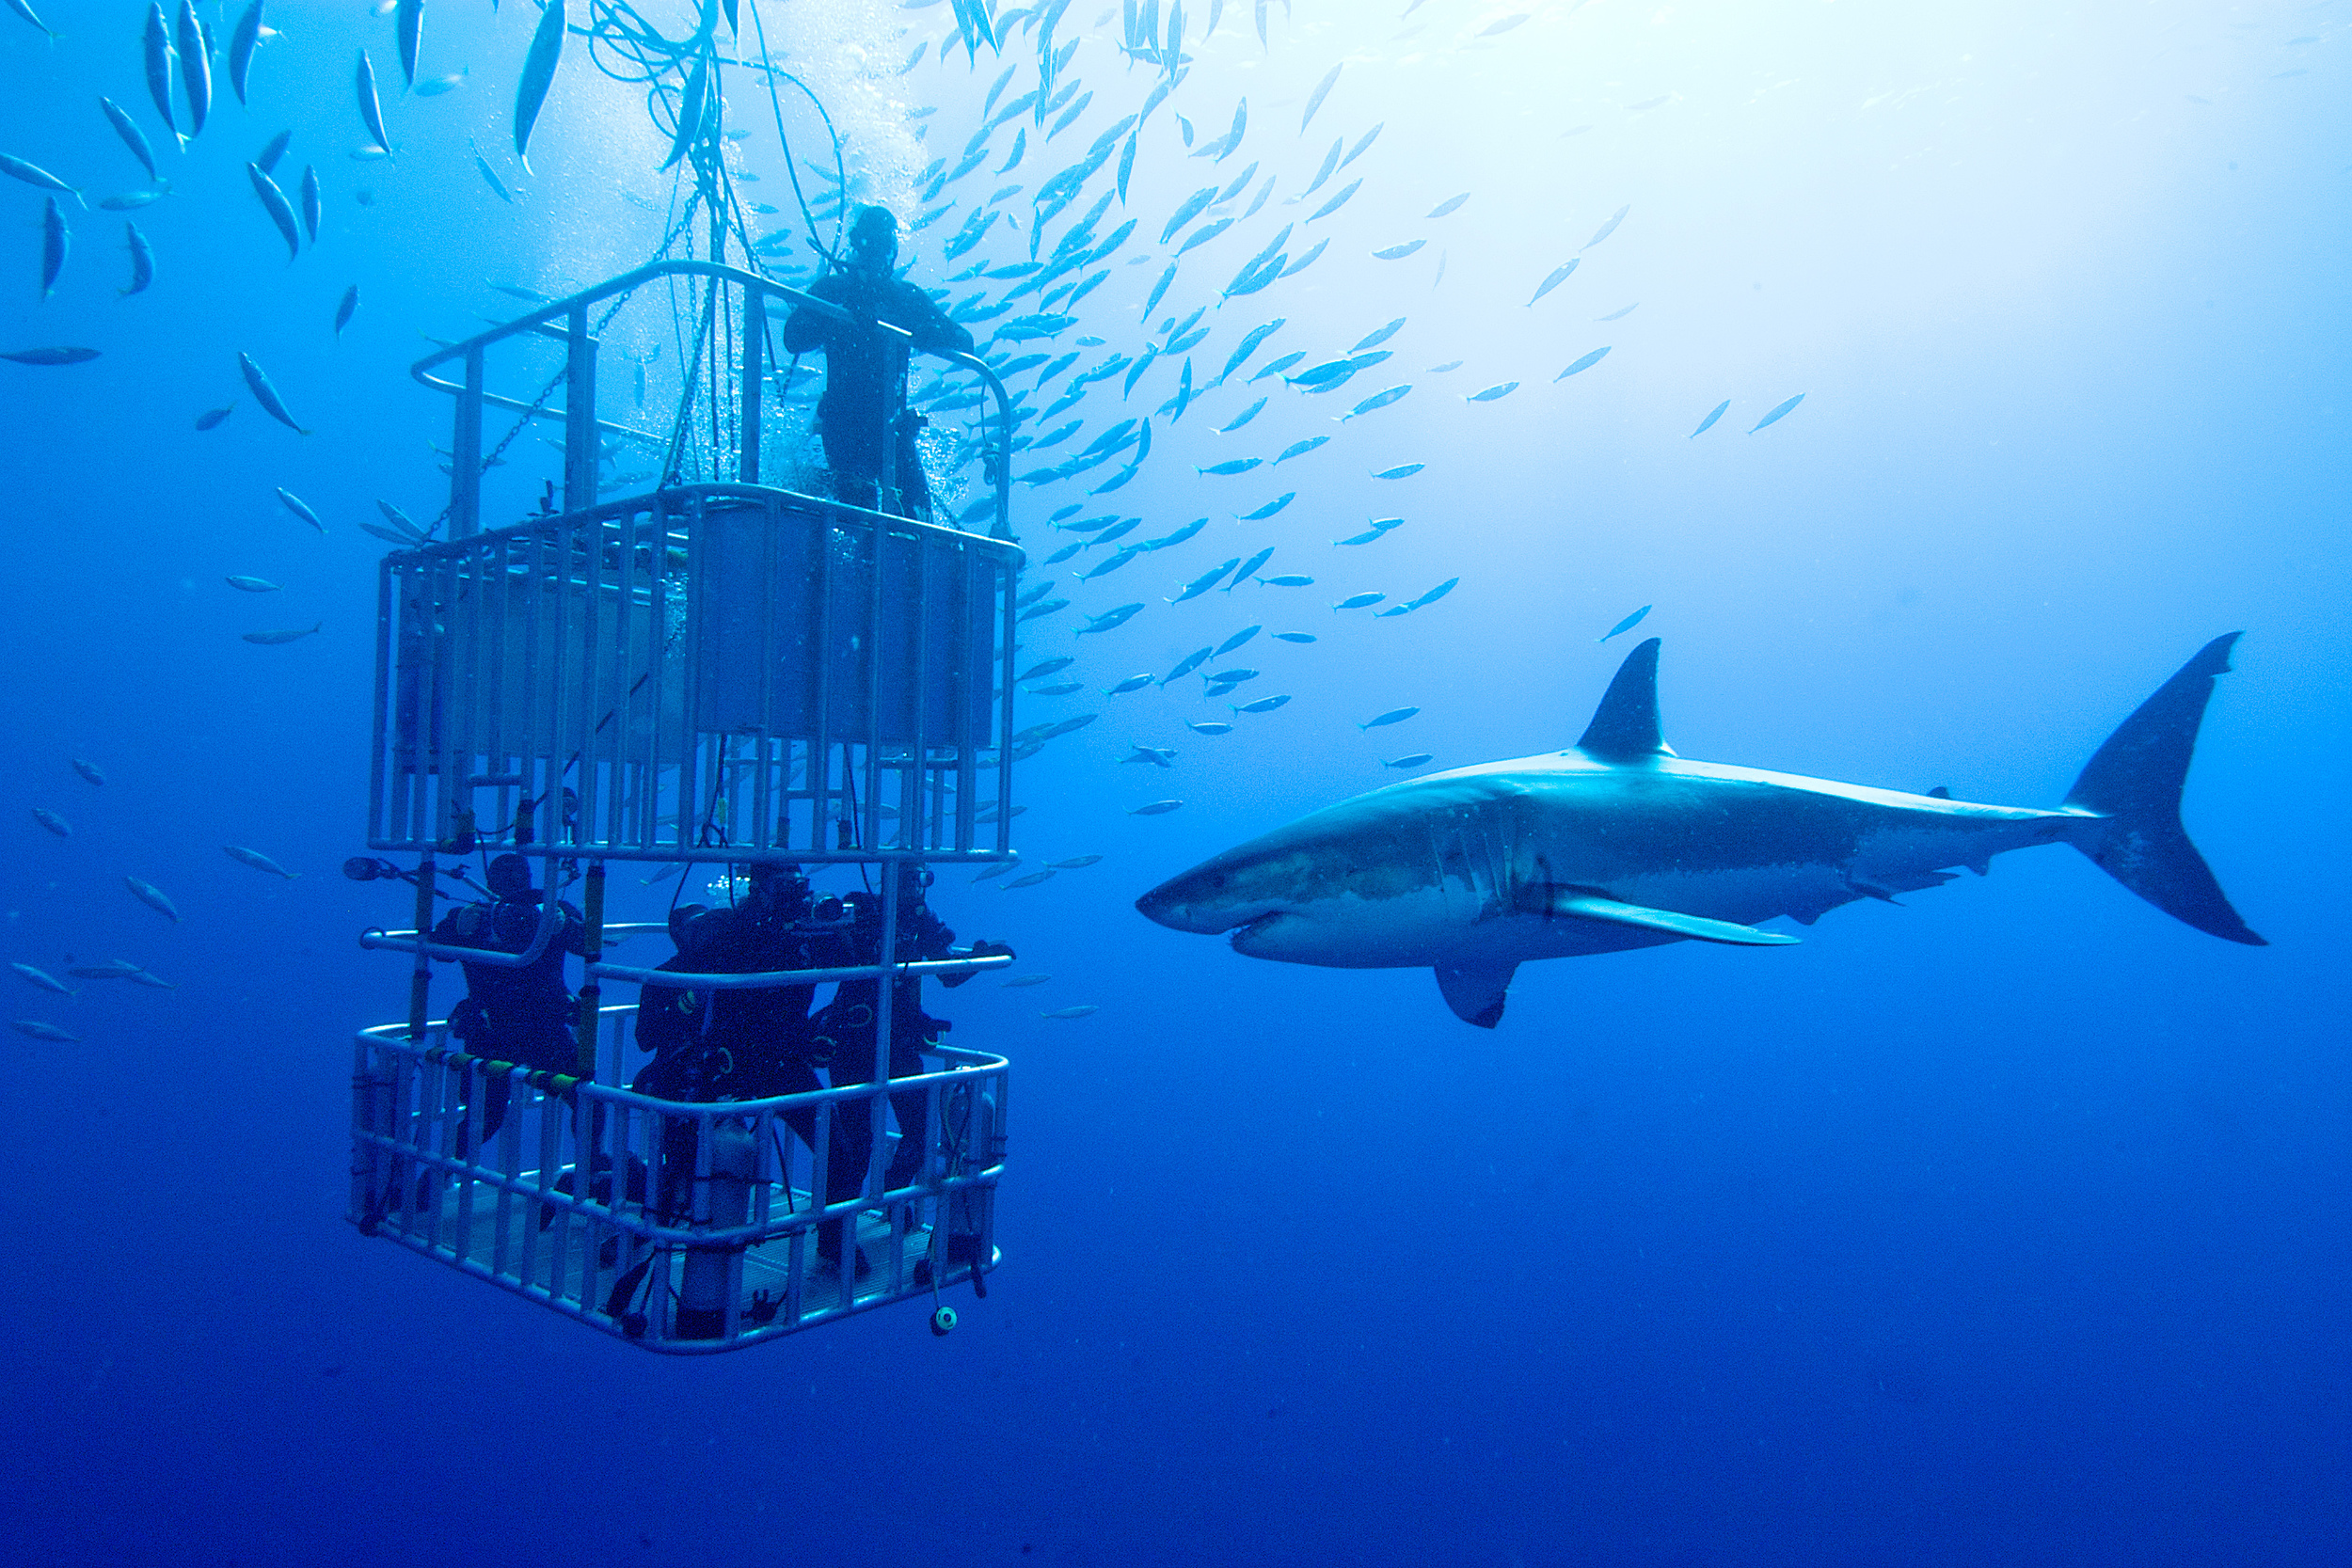 cage diving sharks